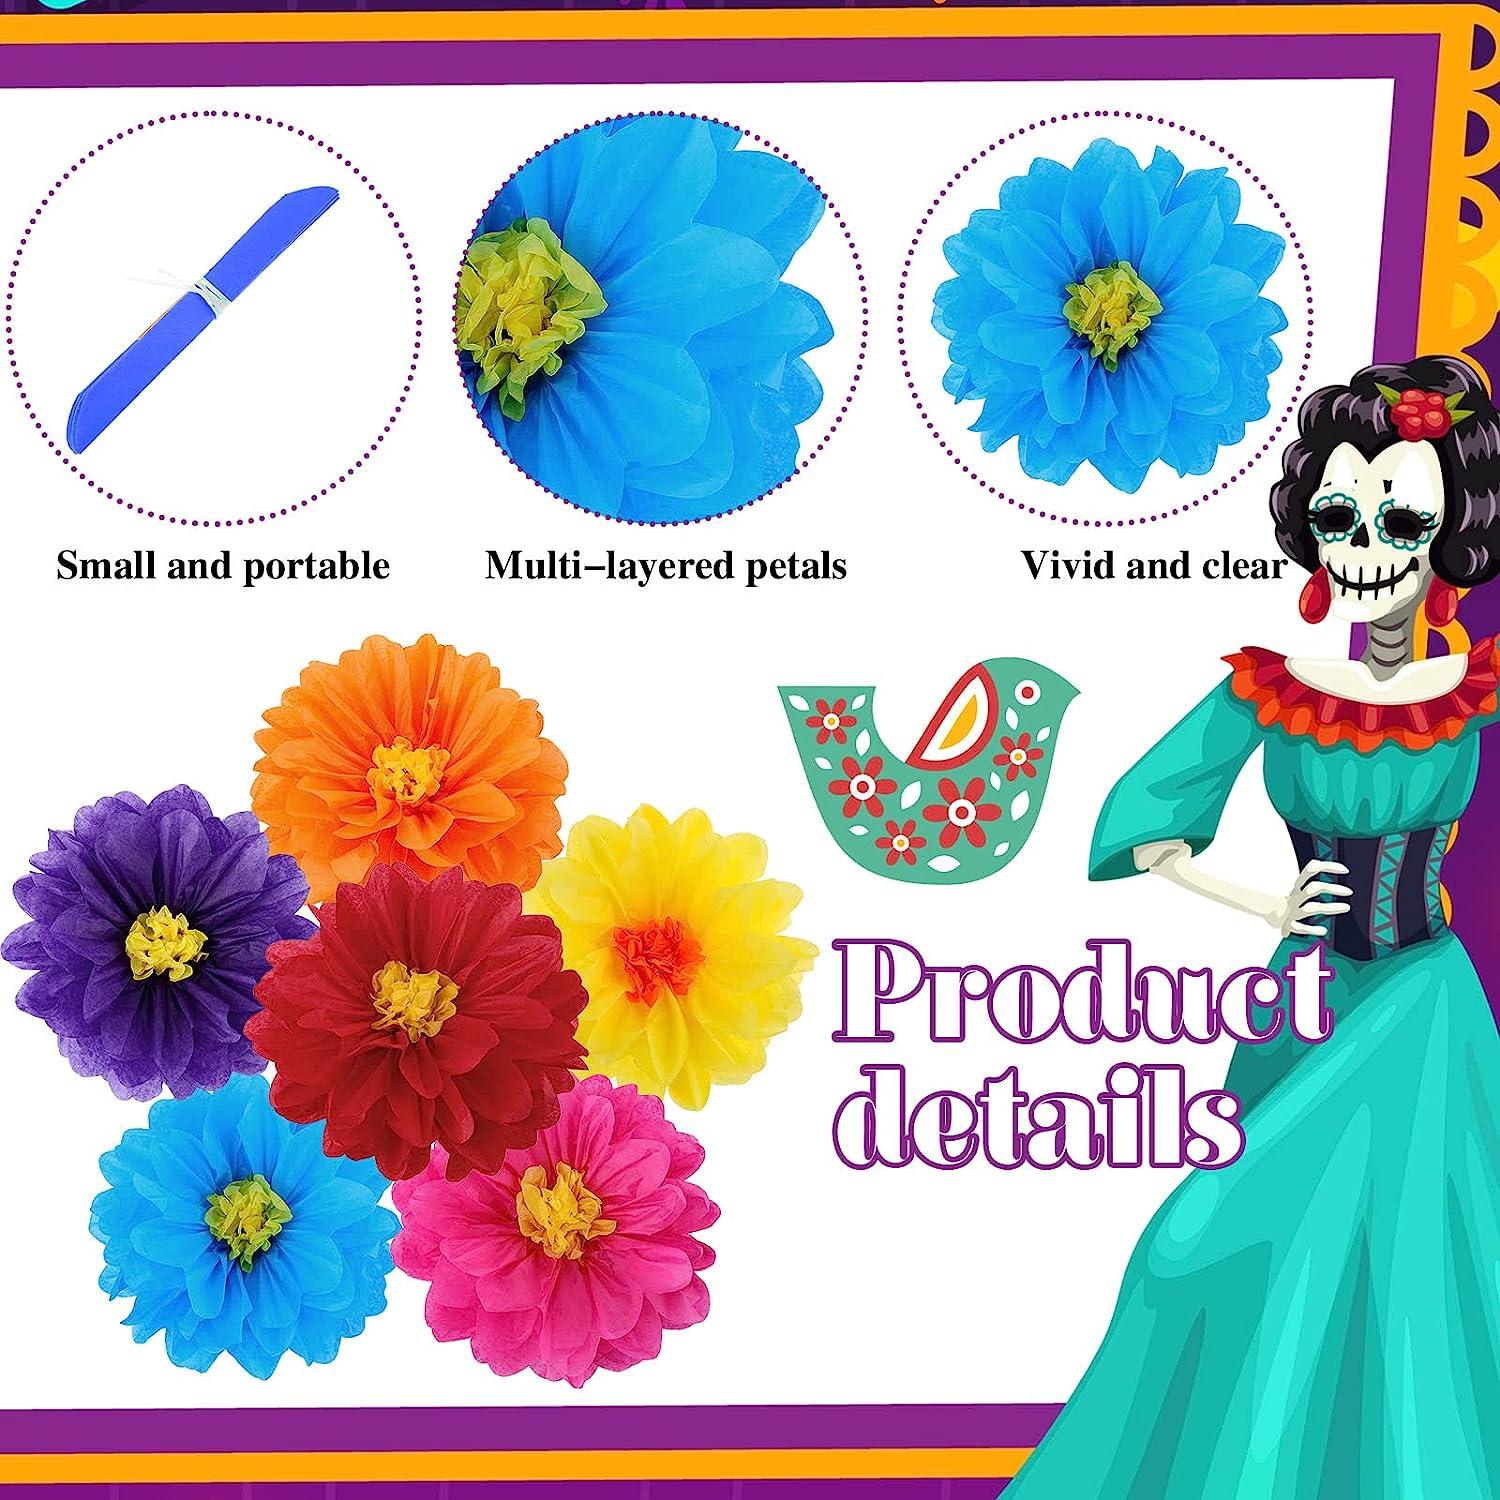 Mexican Paper Flowers Colorful Fiesta Paper Flowers Tissue Paper